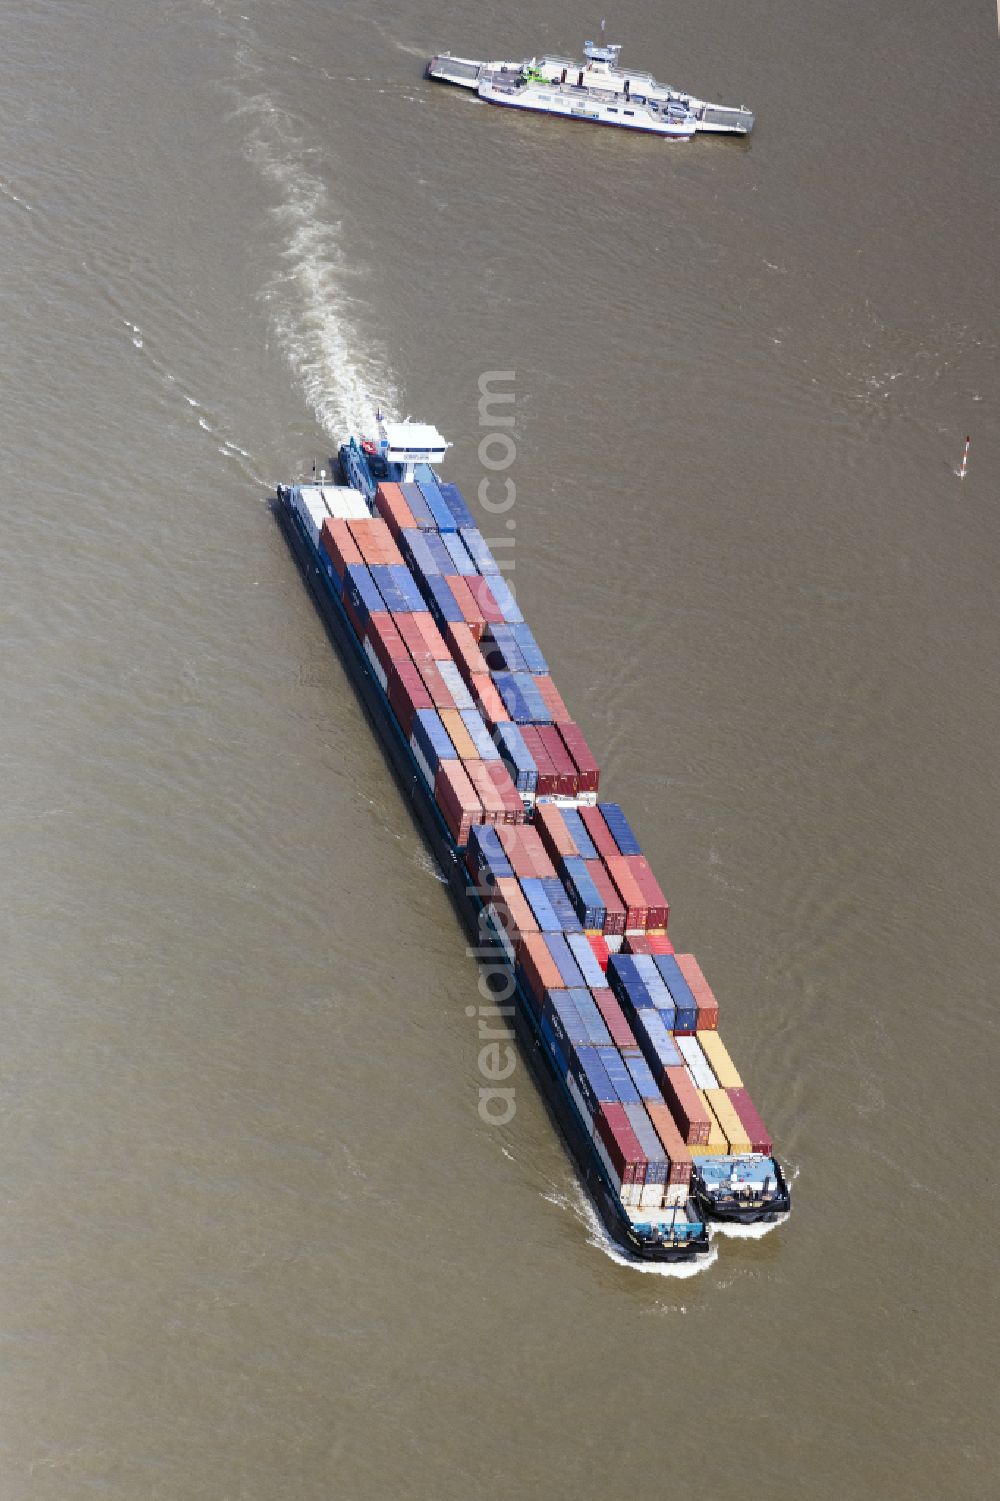 Königswinter from the bird's eye view: Ships and barge trains inland waterway transport in driving on the waterway of the river in Koenigswinter in the state North Rhine-Westphalia, Germany